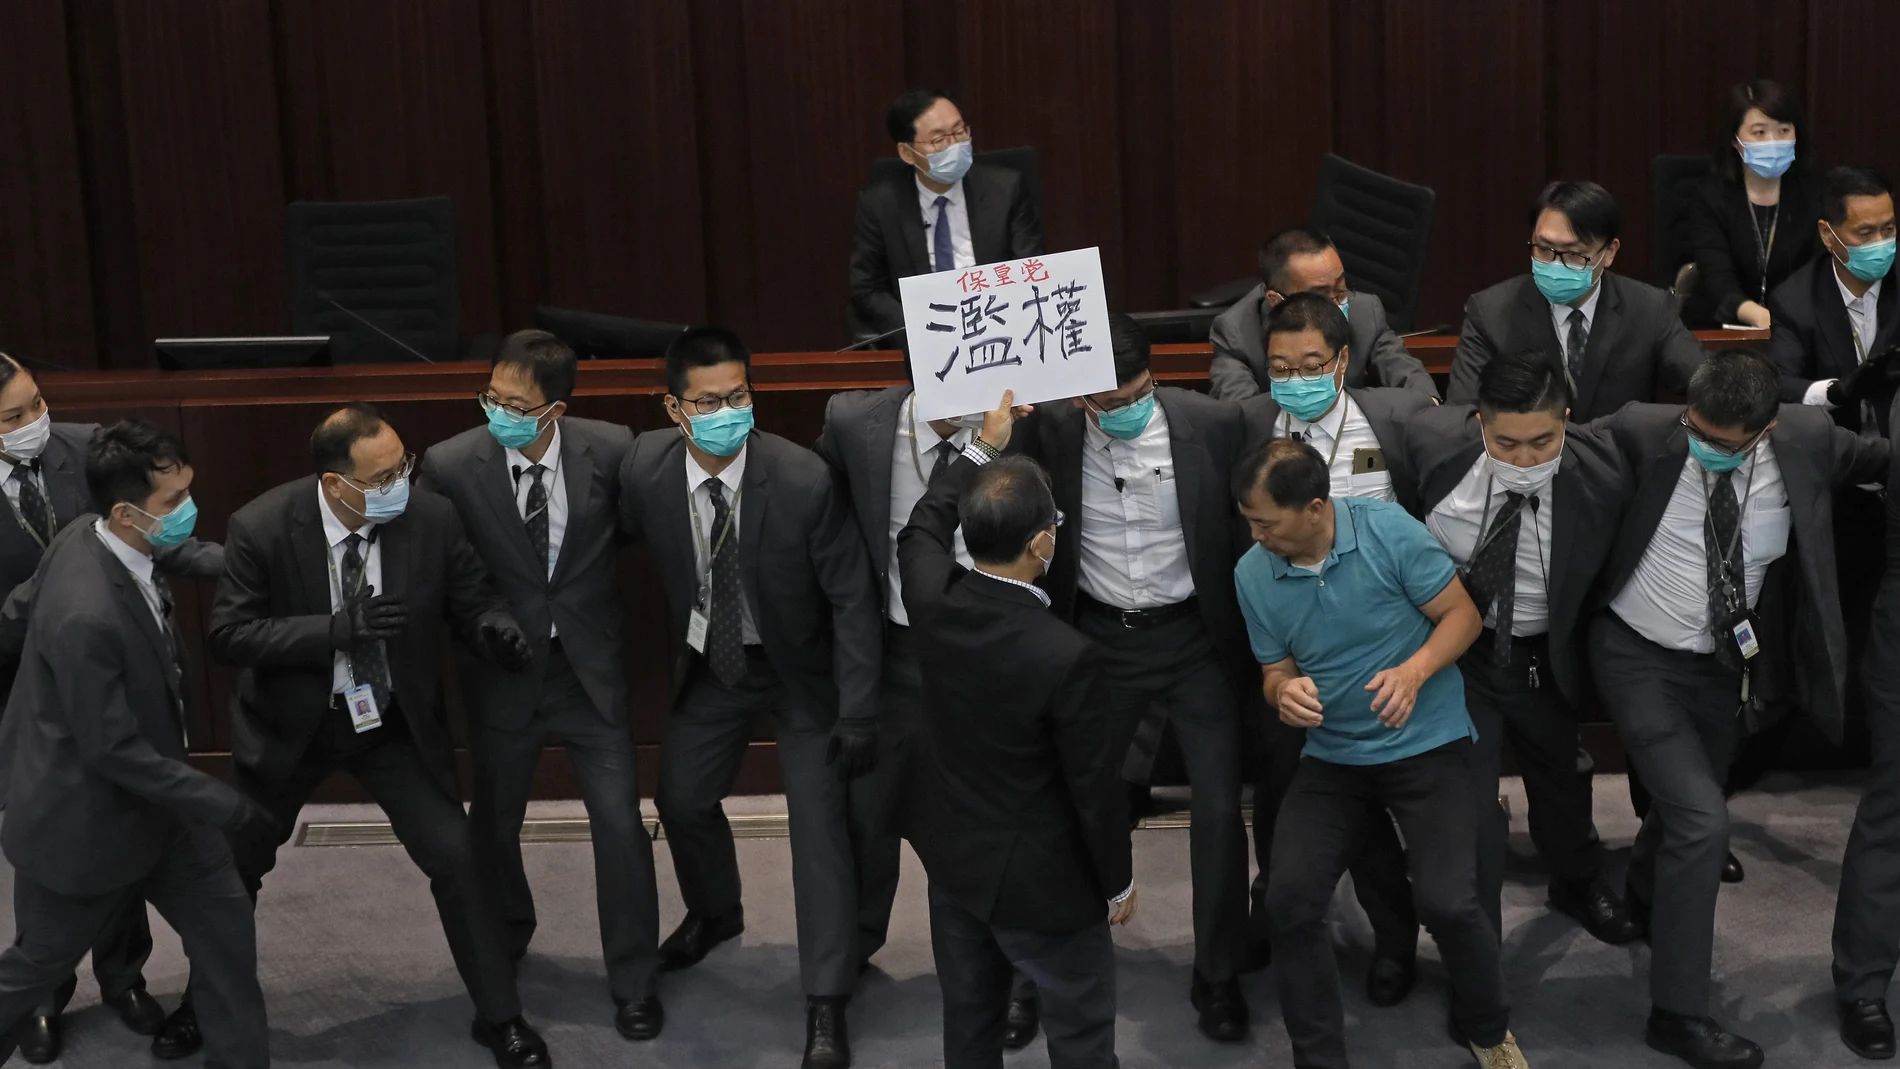 FILE - In this Monday, May 18, 2020, file photo, pro-democracy lawmaker Wu Chi-wai, right in polo shirt, scuffles with security guards during a Legislative Council's House Committee meeting in Hong Kong. China's top legislature approved amendments to Hong Kong's constitution on Tuesday, March 30, 2021, that will give Beijing more control over the make-up of the city's legislature.Â  (AP Photo/Vincent Yu, File)